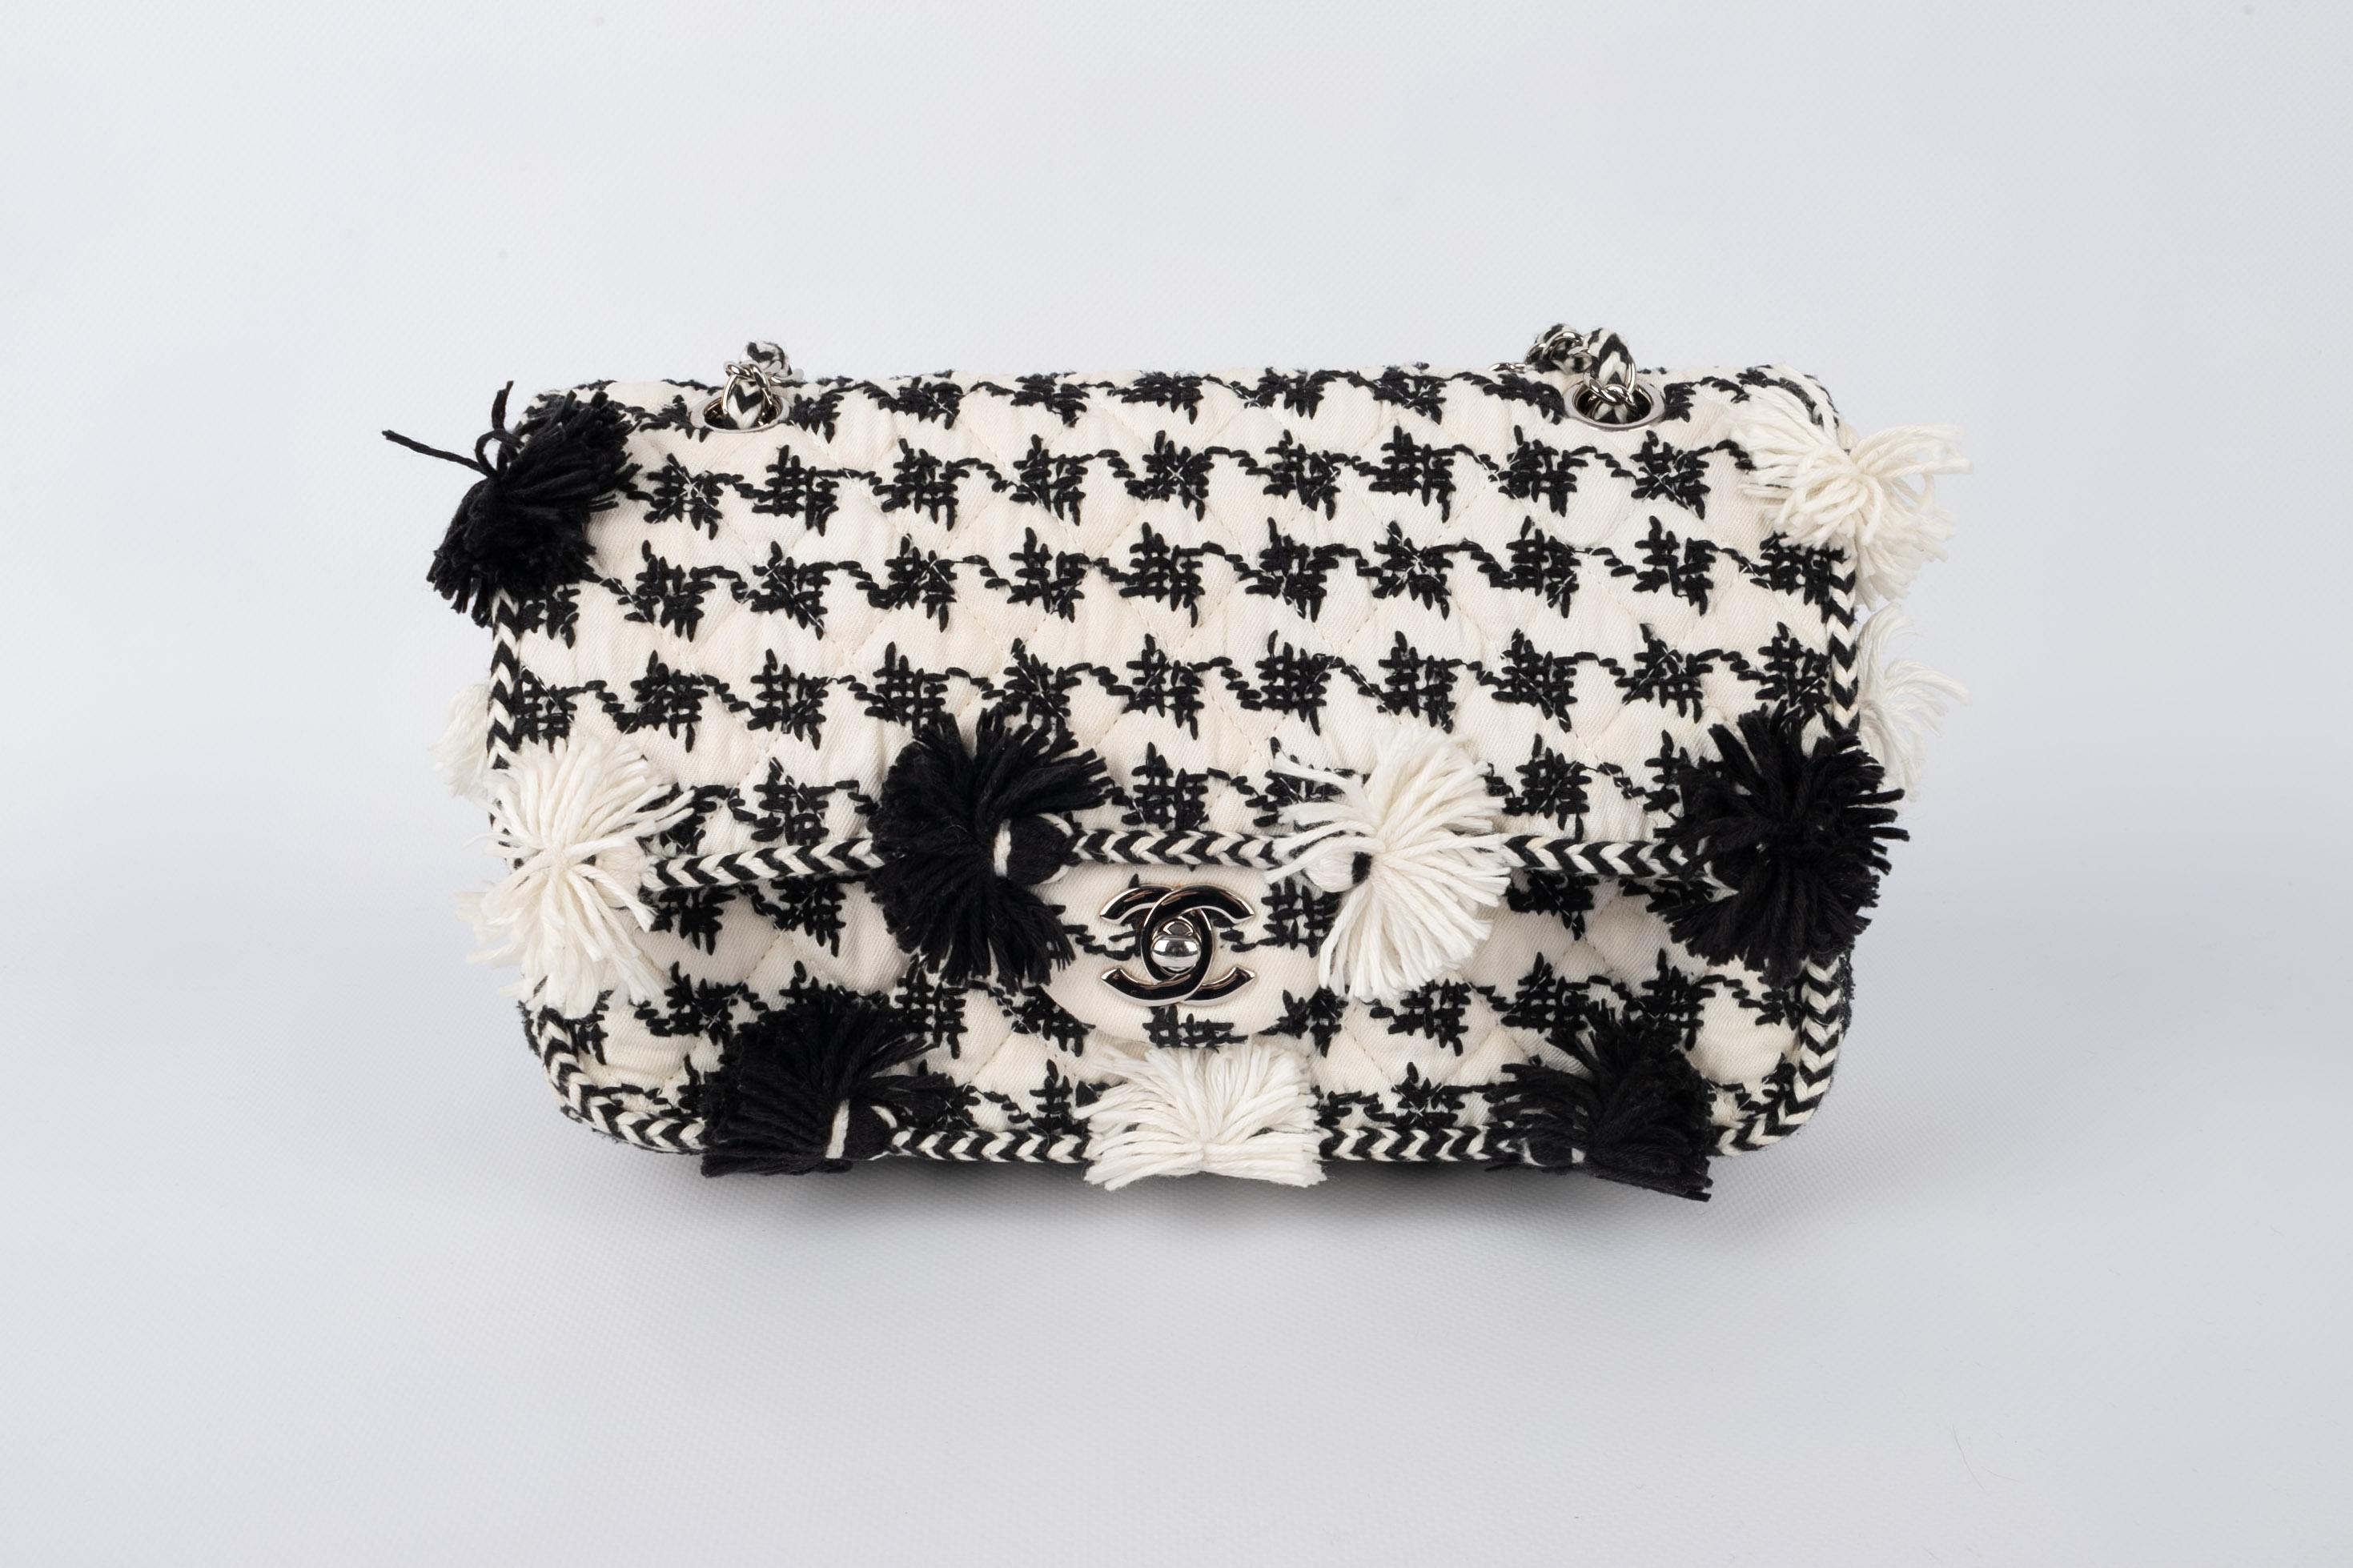 CHANEL - (Made in France) Black and white bag ornamented with pompoms and silvery metal elements. Bag with a serial number. 2015 Resort Collection.

Condition:
Good condition

Dimensions:
Length: 26 cm - Height: 18 cm - Depth: 7 cm - Handle length: